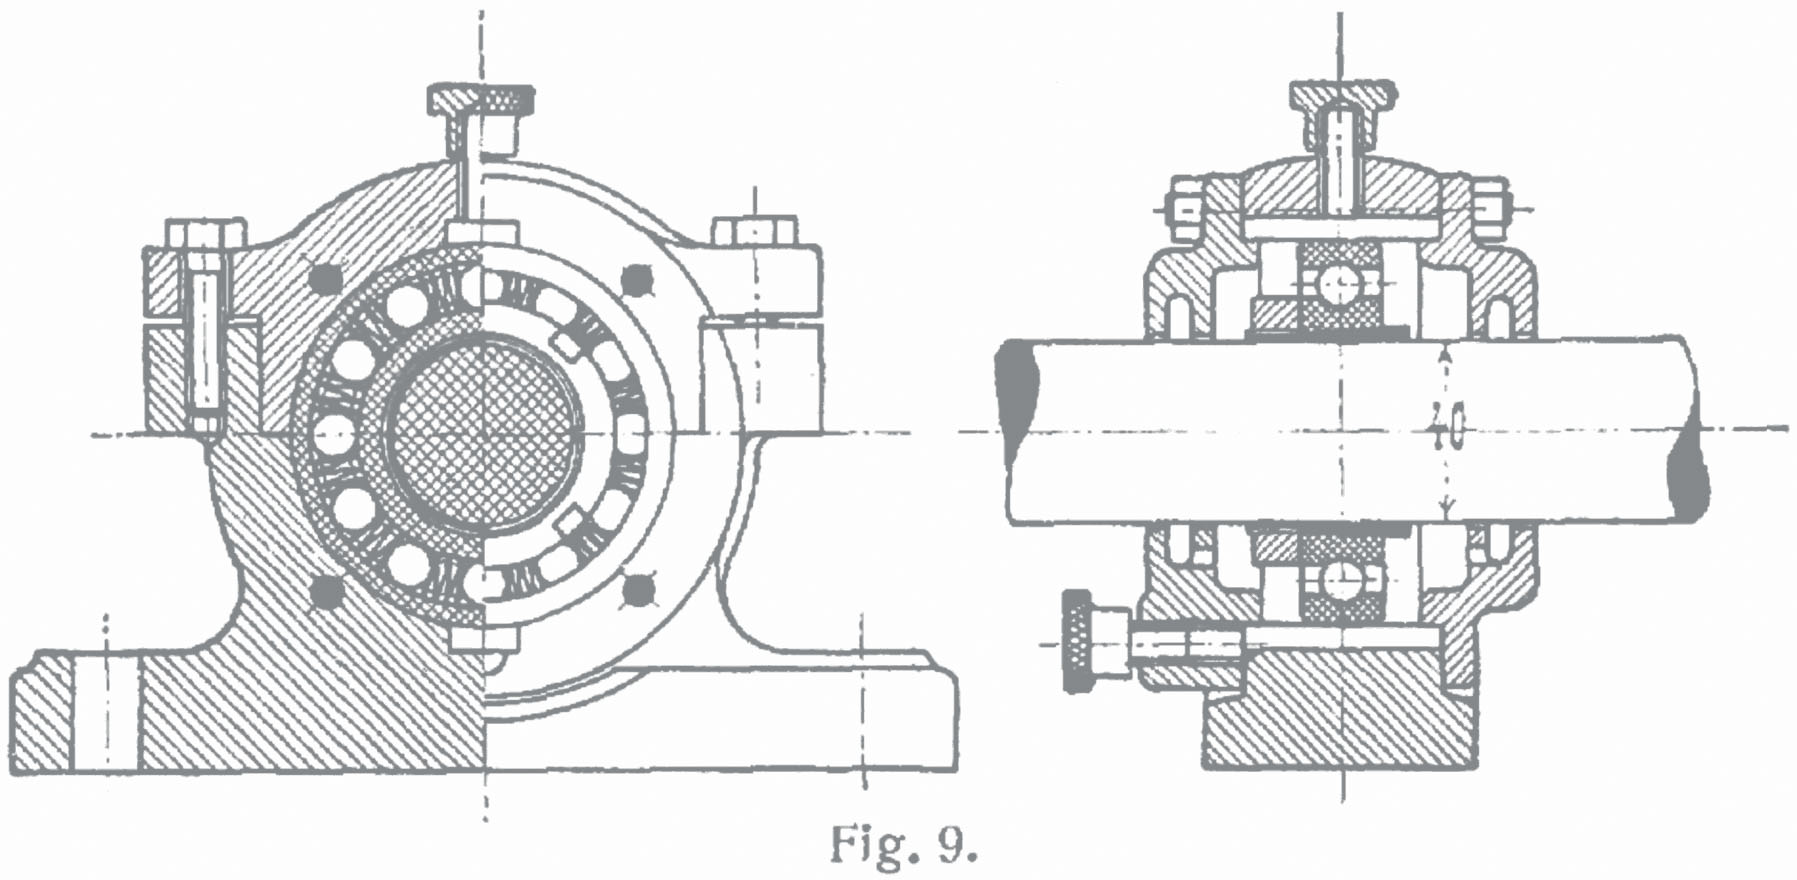 Drawing of a ball grinding machine